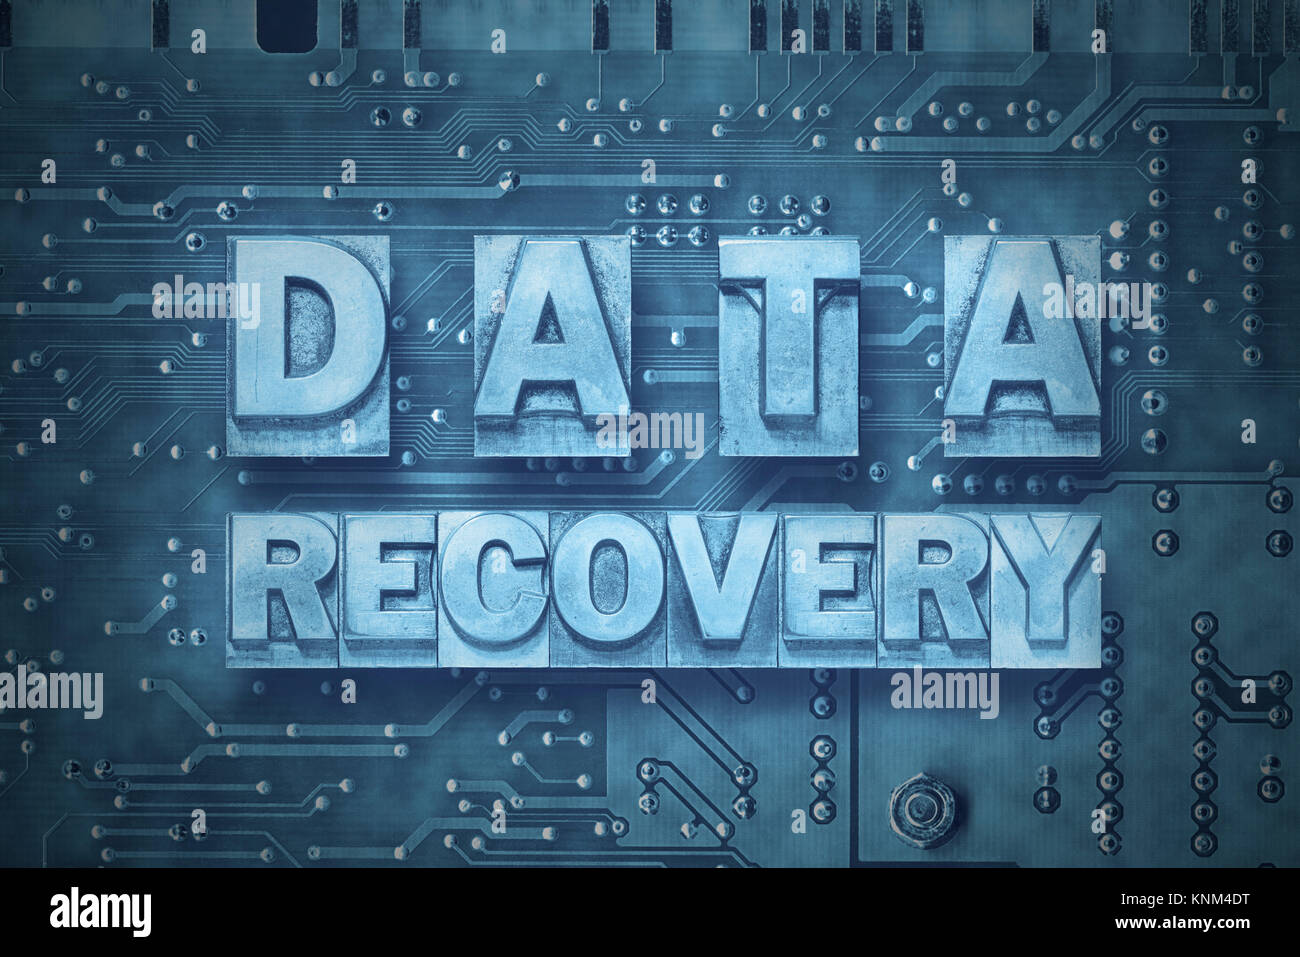 data recovery phrase made from metallic letterpress blocks on the pc board background Stock Photo